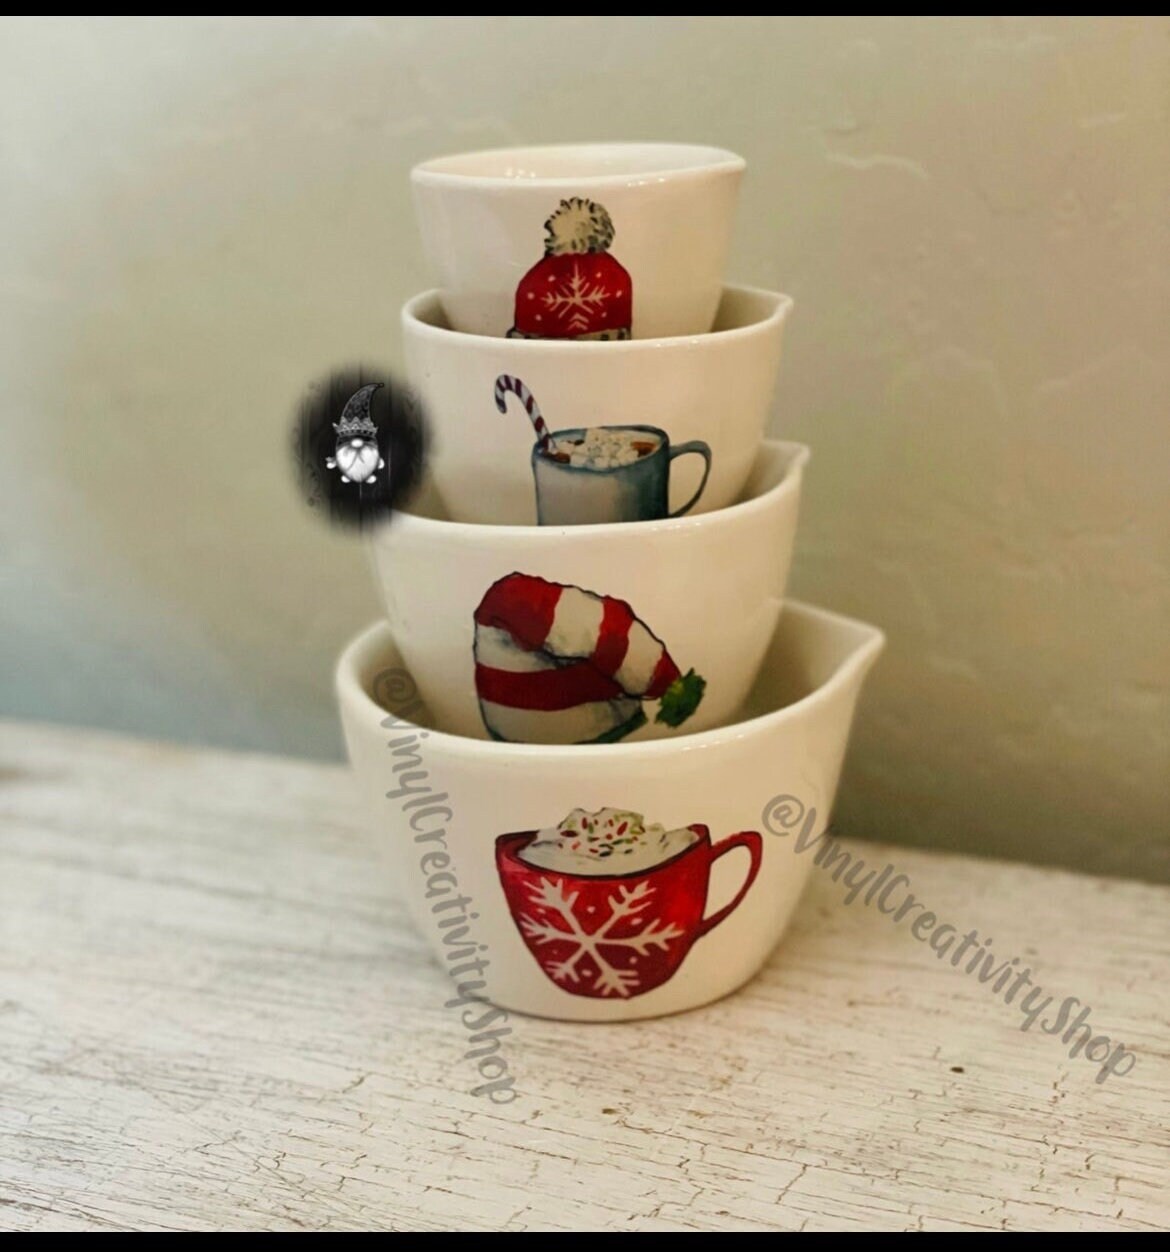 Measuring Cups Wall Decals Home Decor Wall Stickers - 5 PCS VWAQ - MCWD